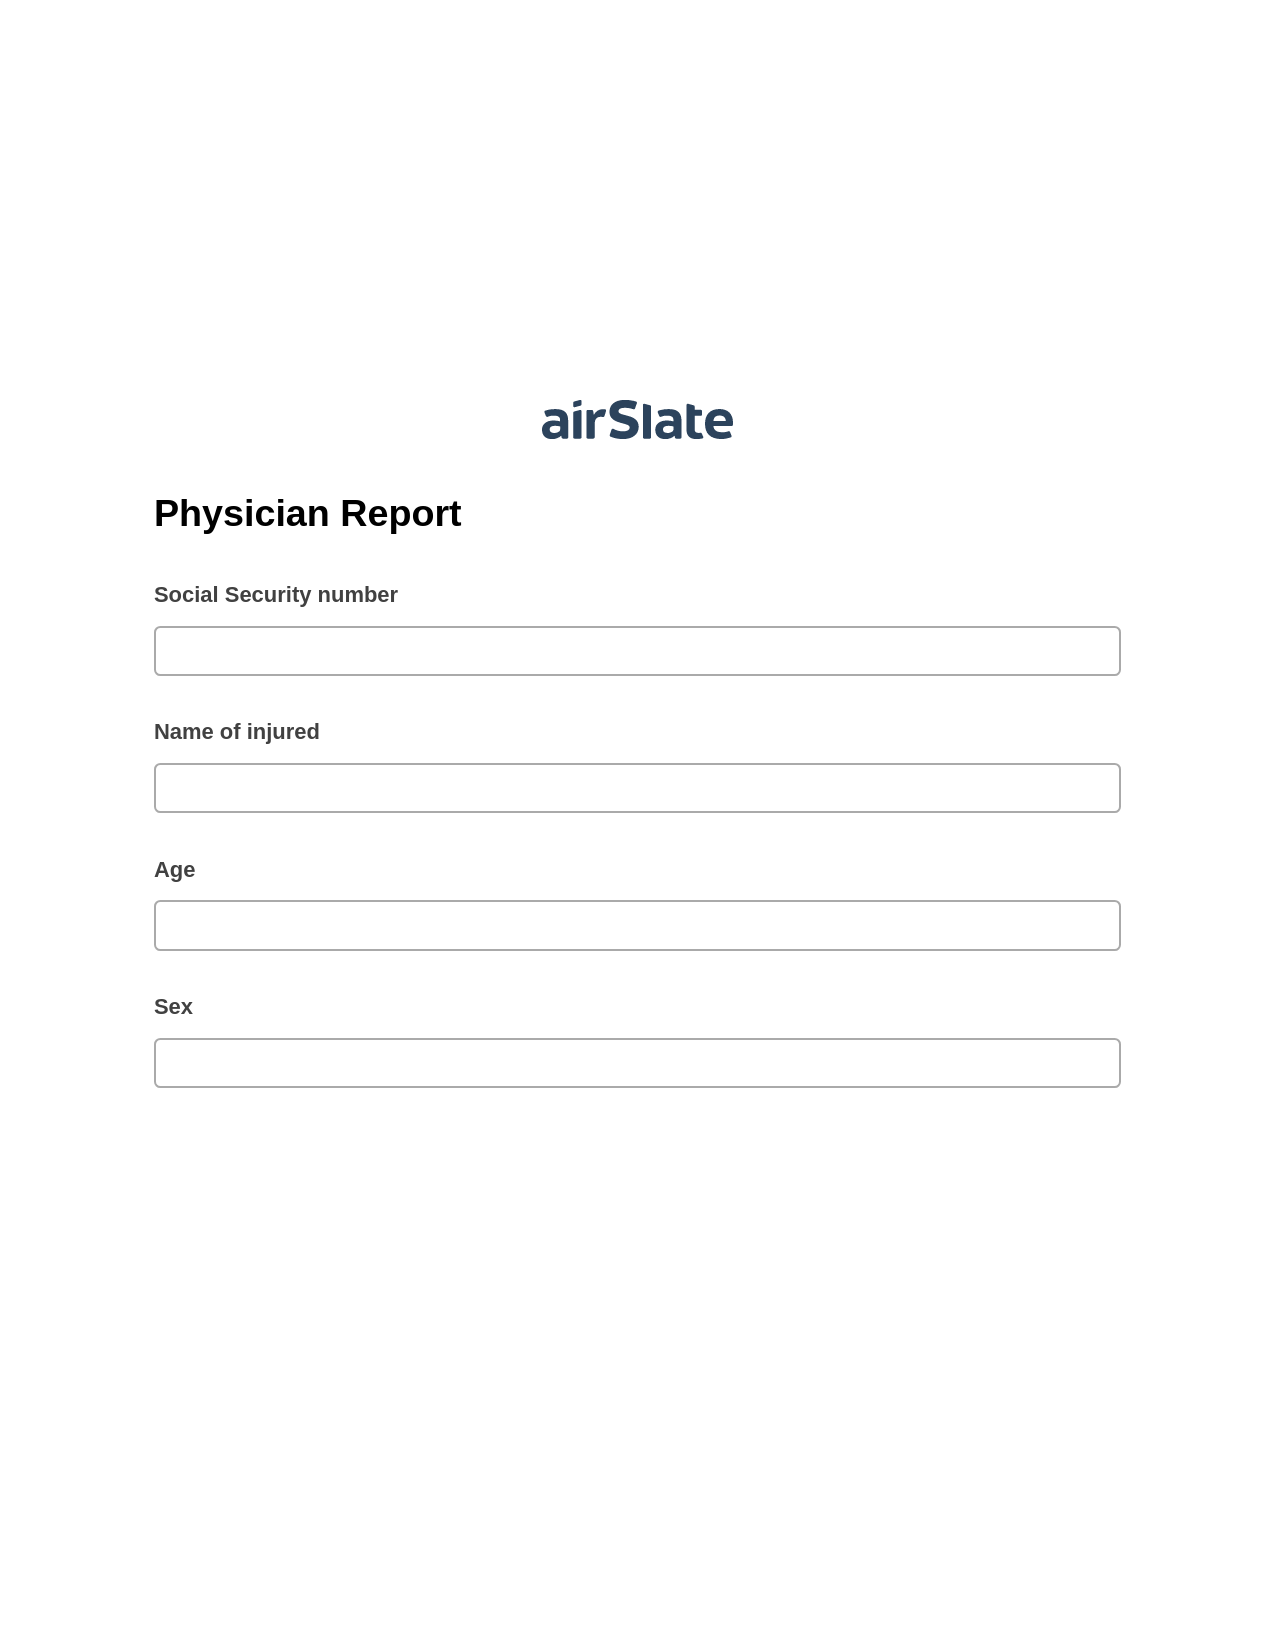 Multirole Physician Report Pre-fill from CSV File Bot, Send Mailchimp Campaign Bot, Archive to Google Drive Bot